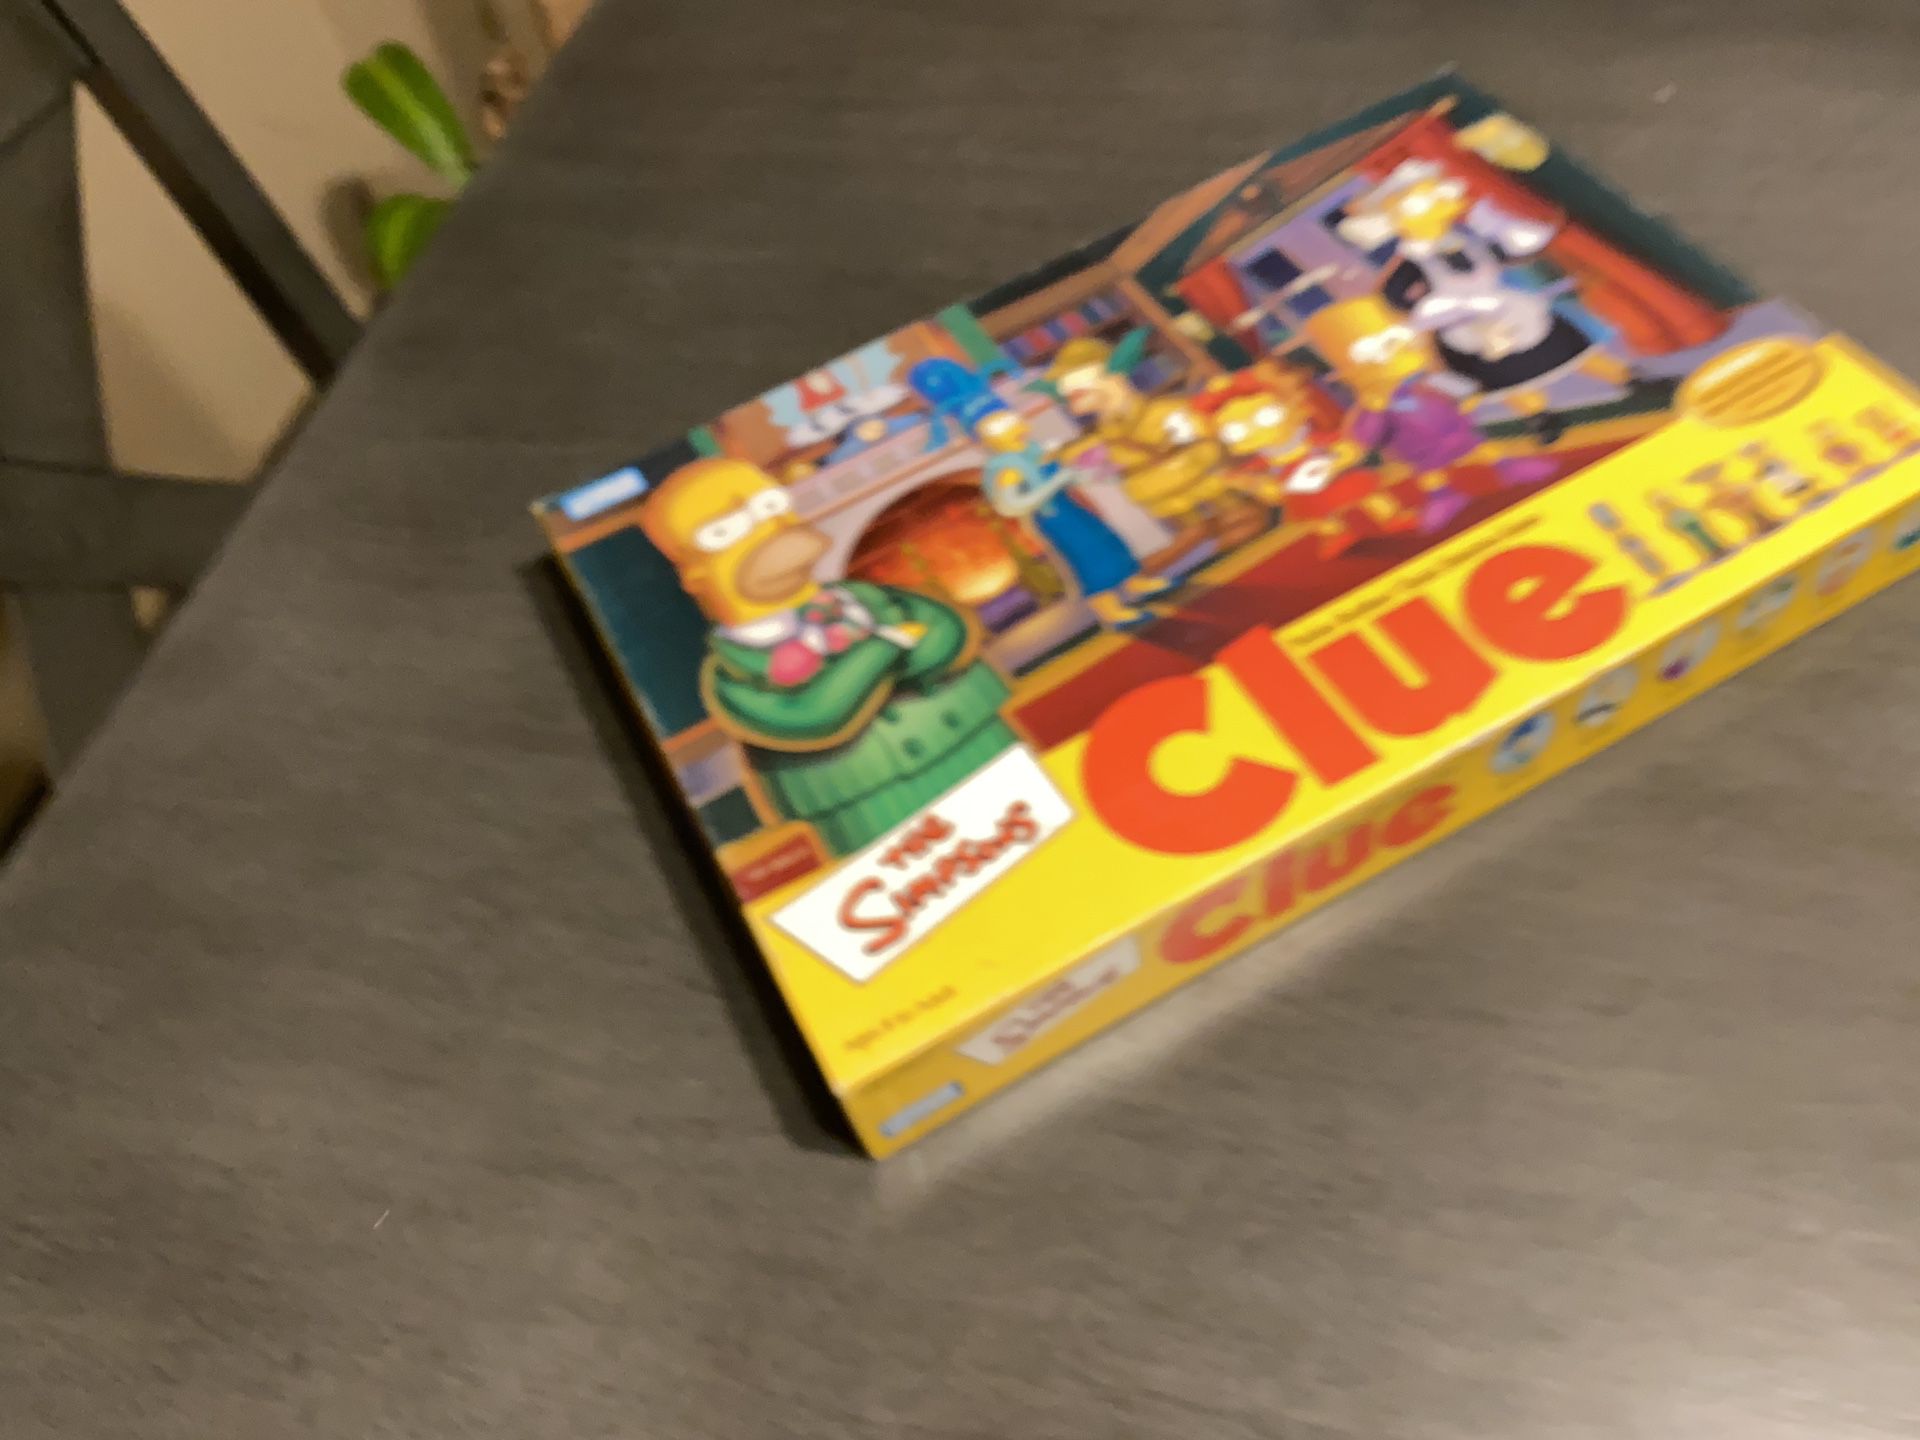 Simpson’s clue board game complete